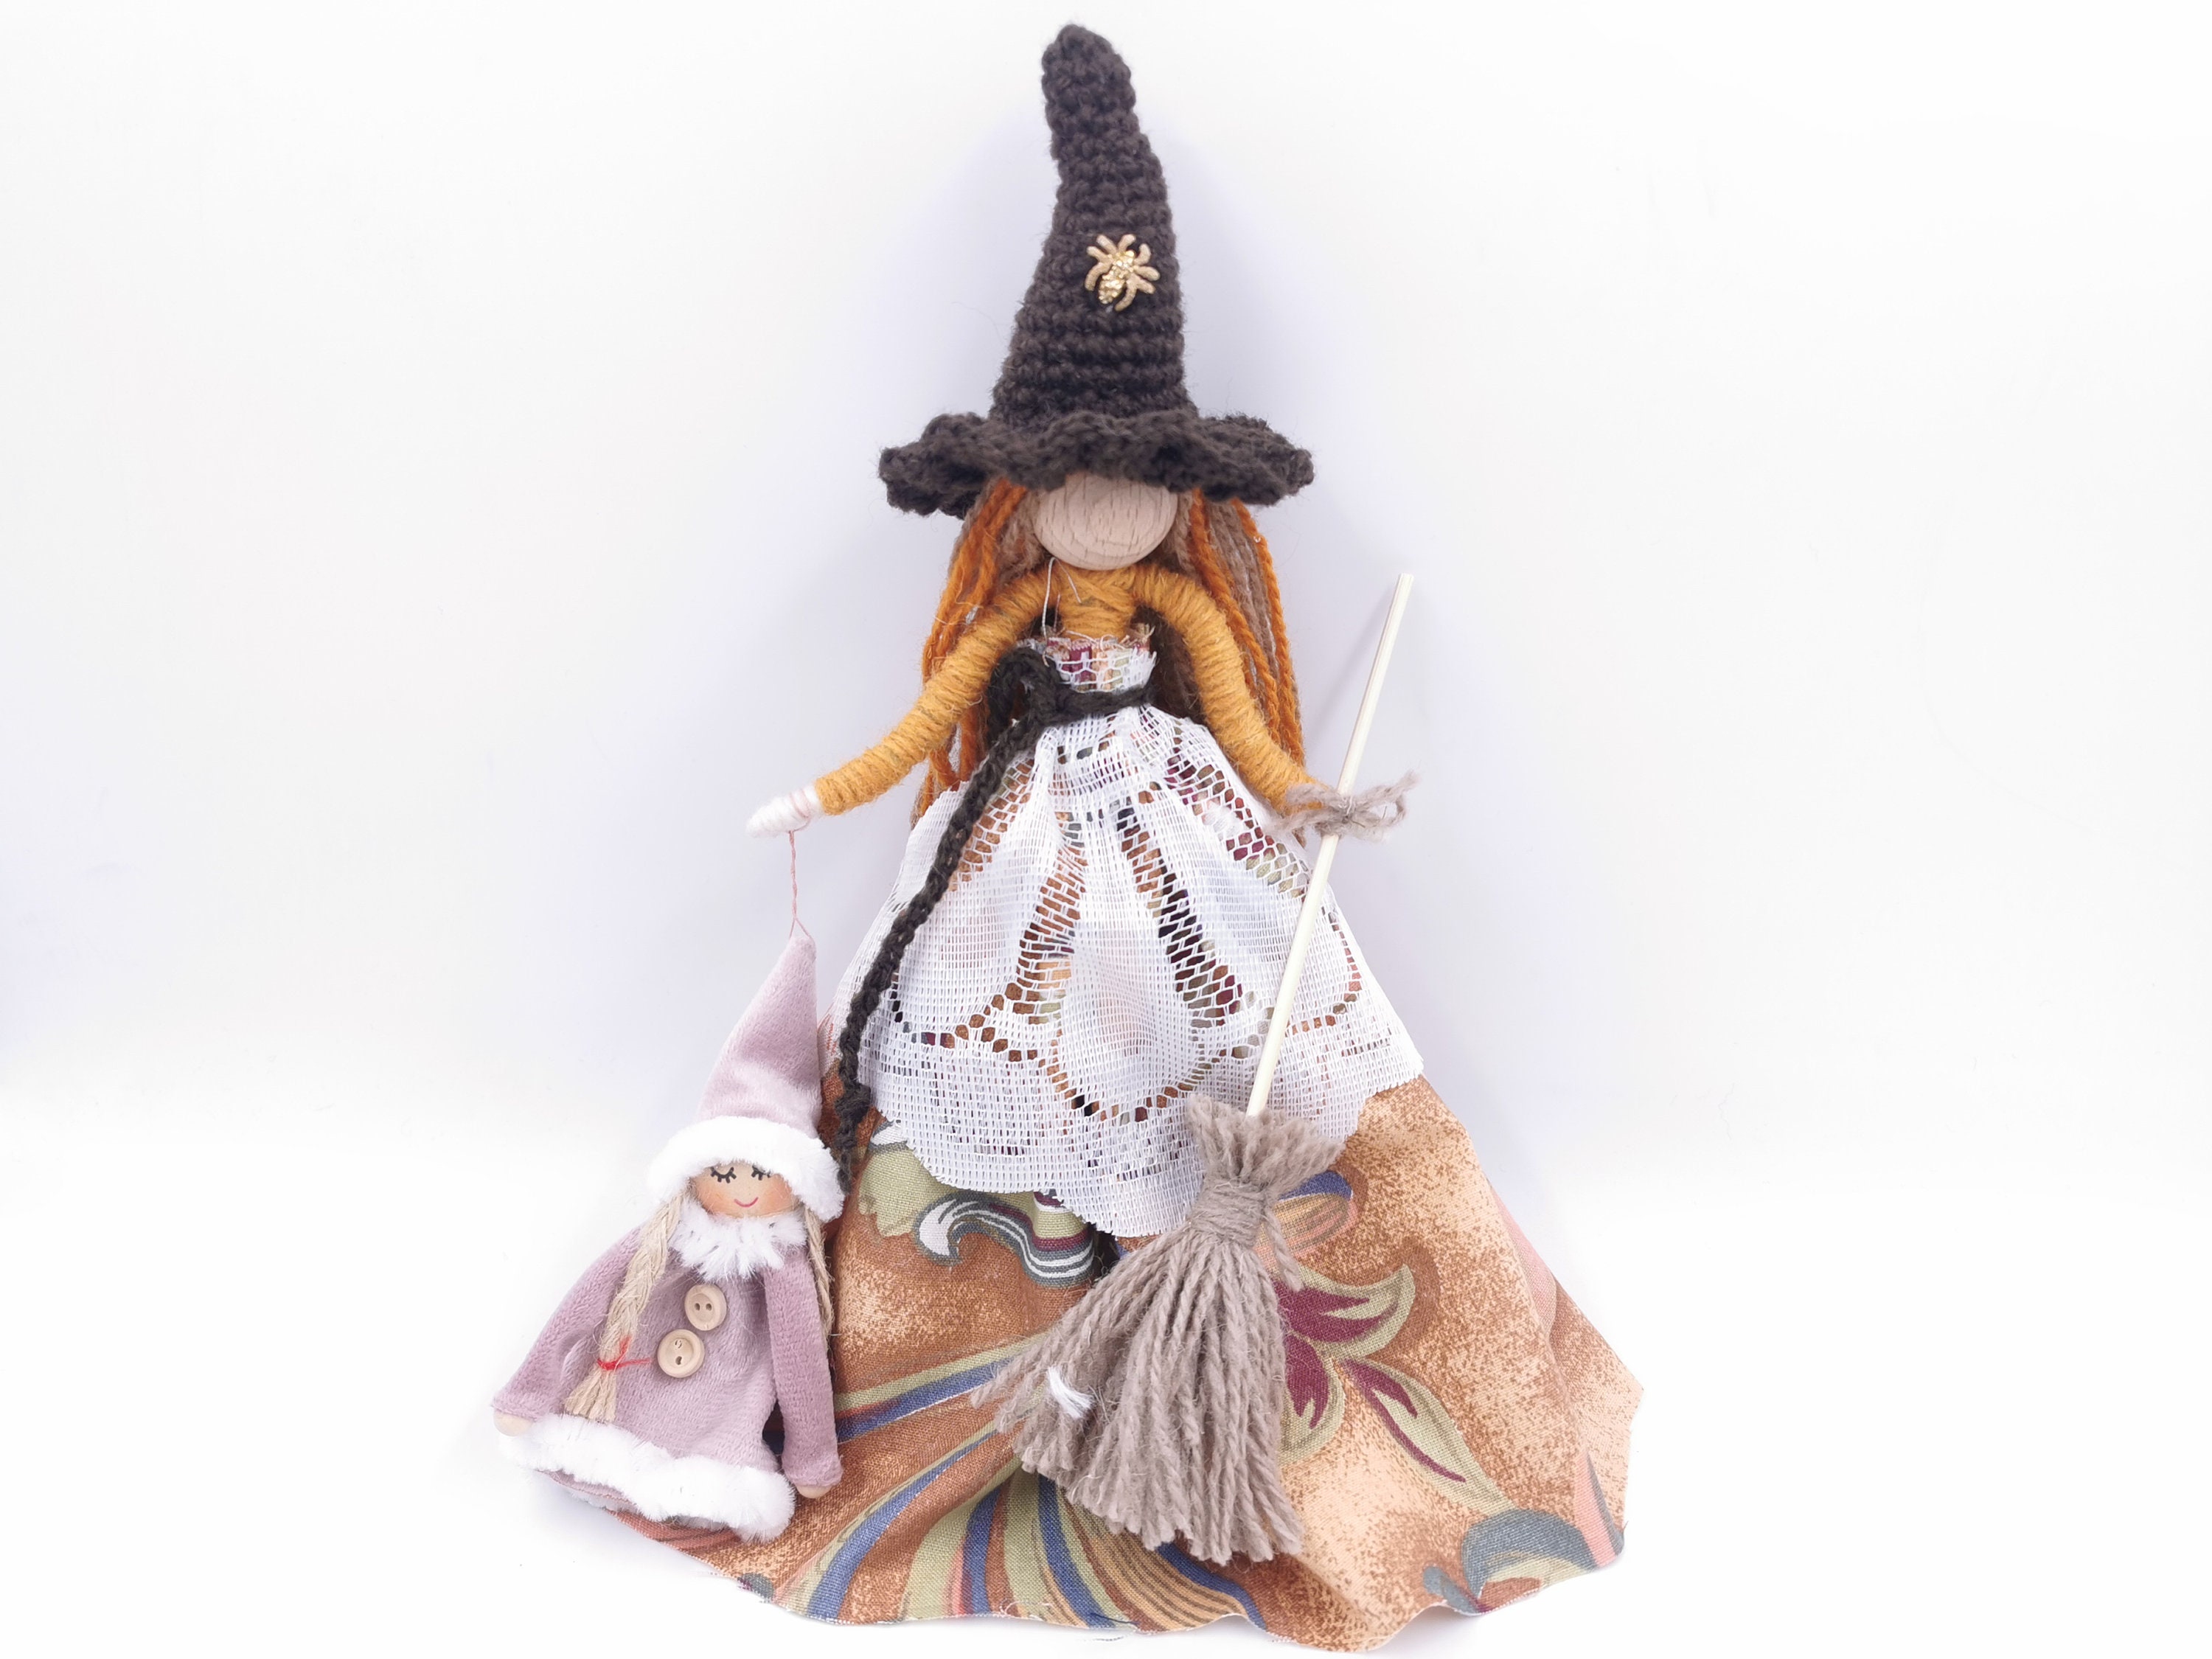 La Befana the Good Witch of Epiphany by SCDoctor on DeviantArt